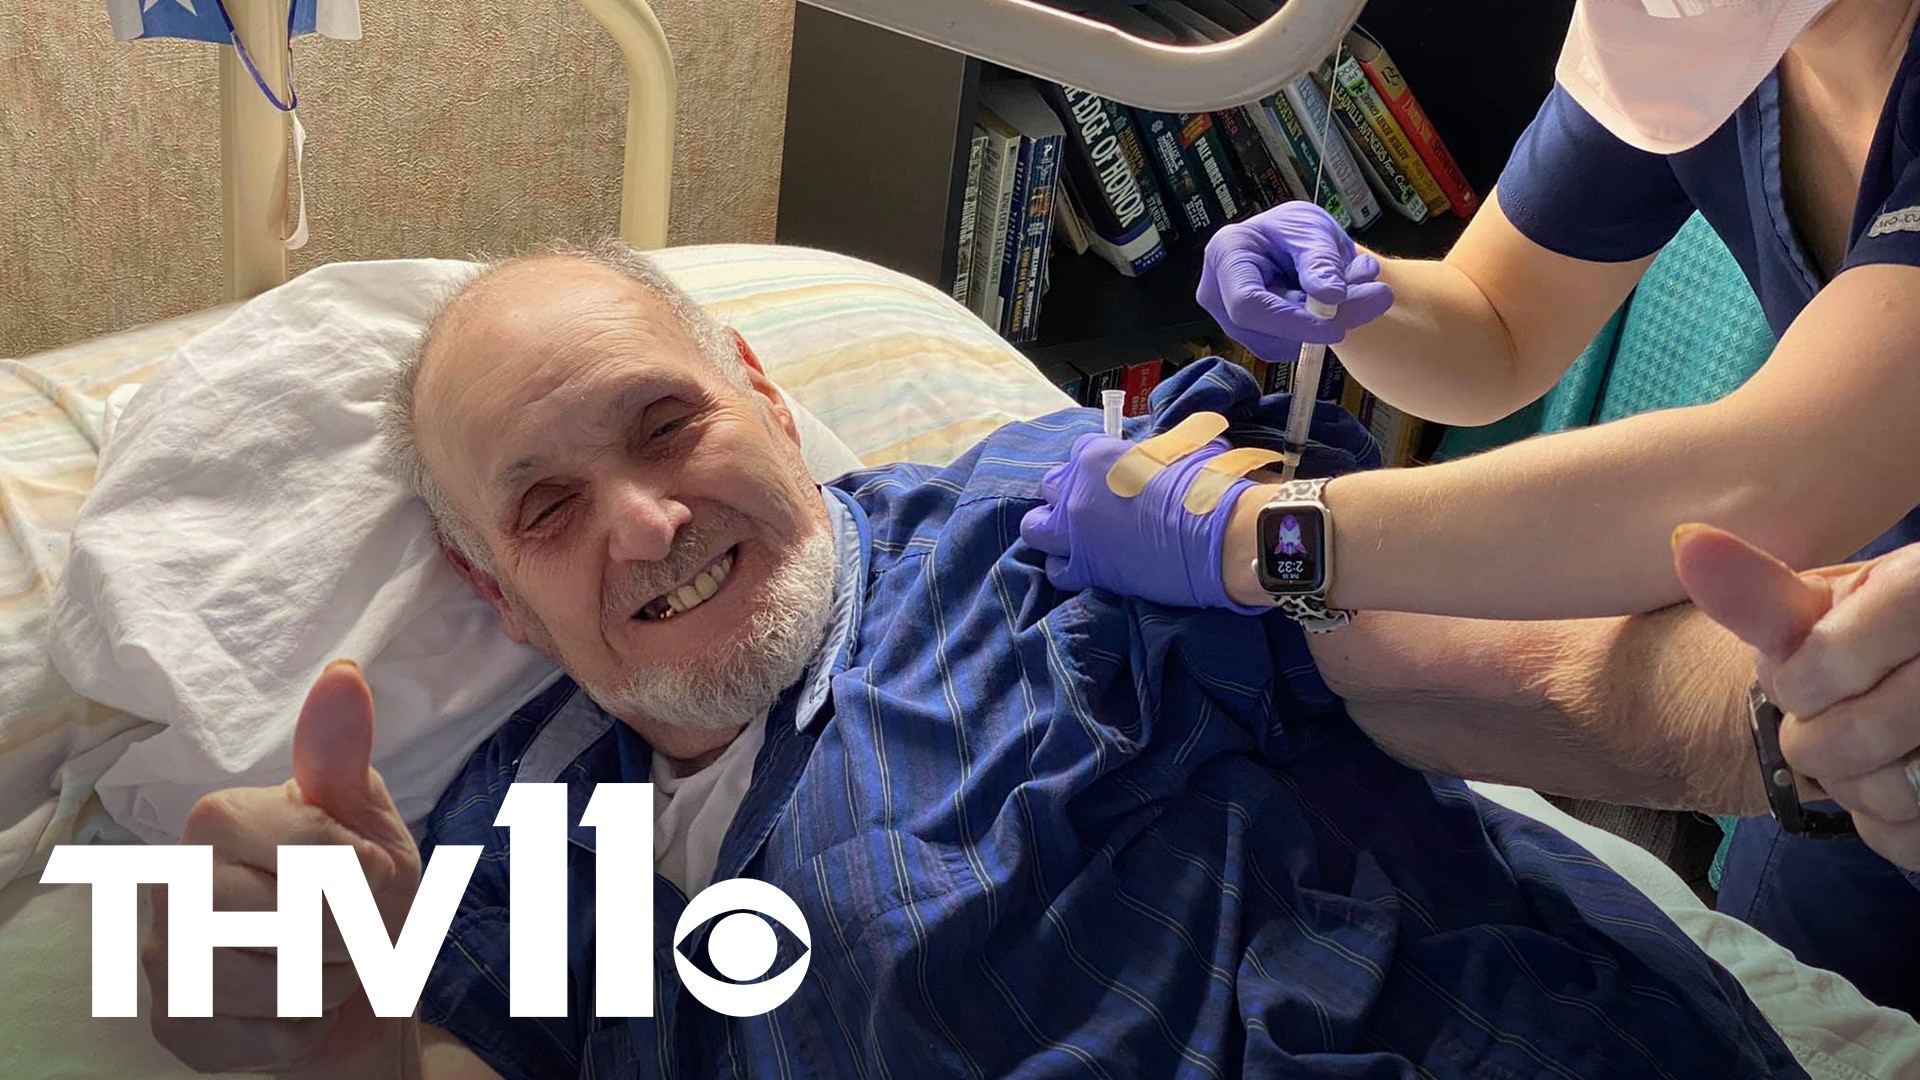 Arkansas nursing homes and long-term care facilities are seeing a hopeful decline in positive COVID-19 cases after receiving the vaccine.